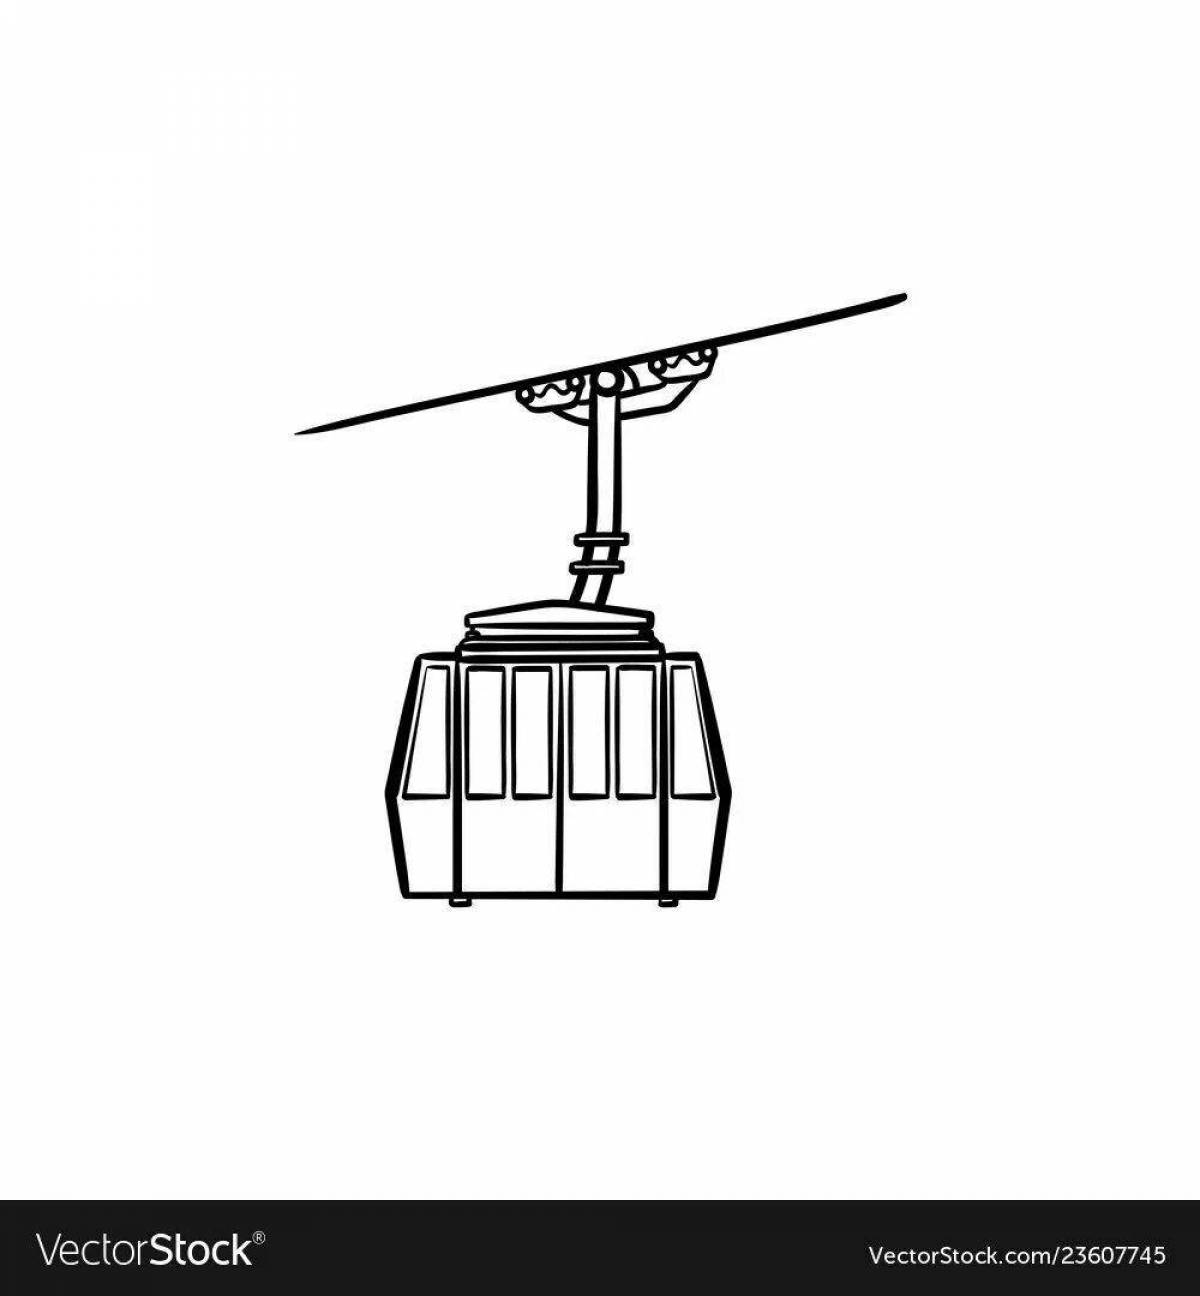 Cable car #1